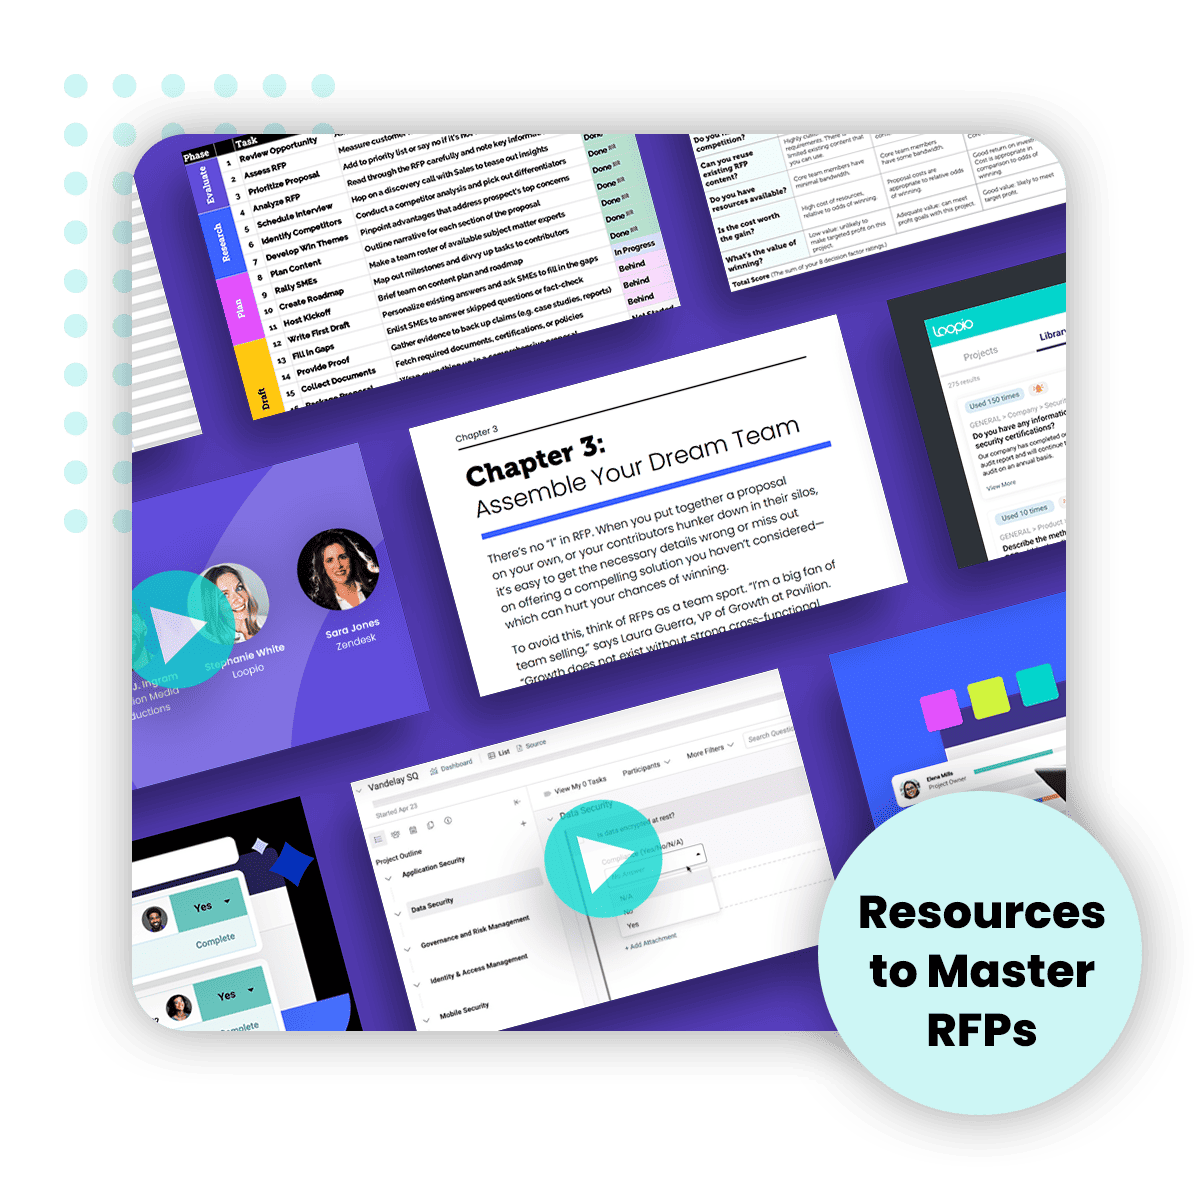 RFP Response Dream Team's resource bundle showcases templates, checklists, video resources, and more.